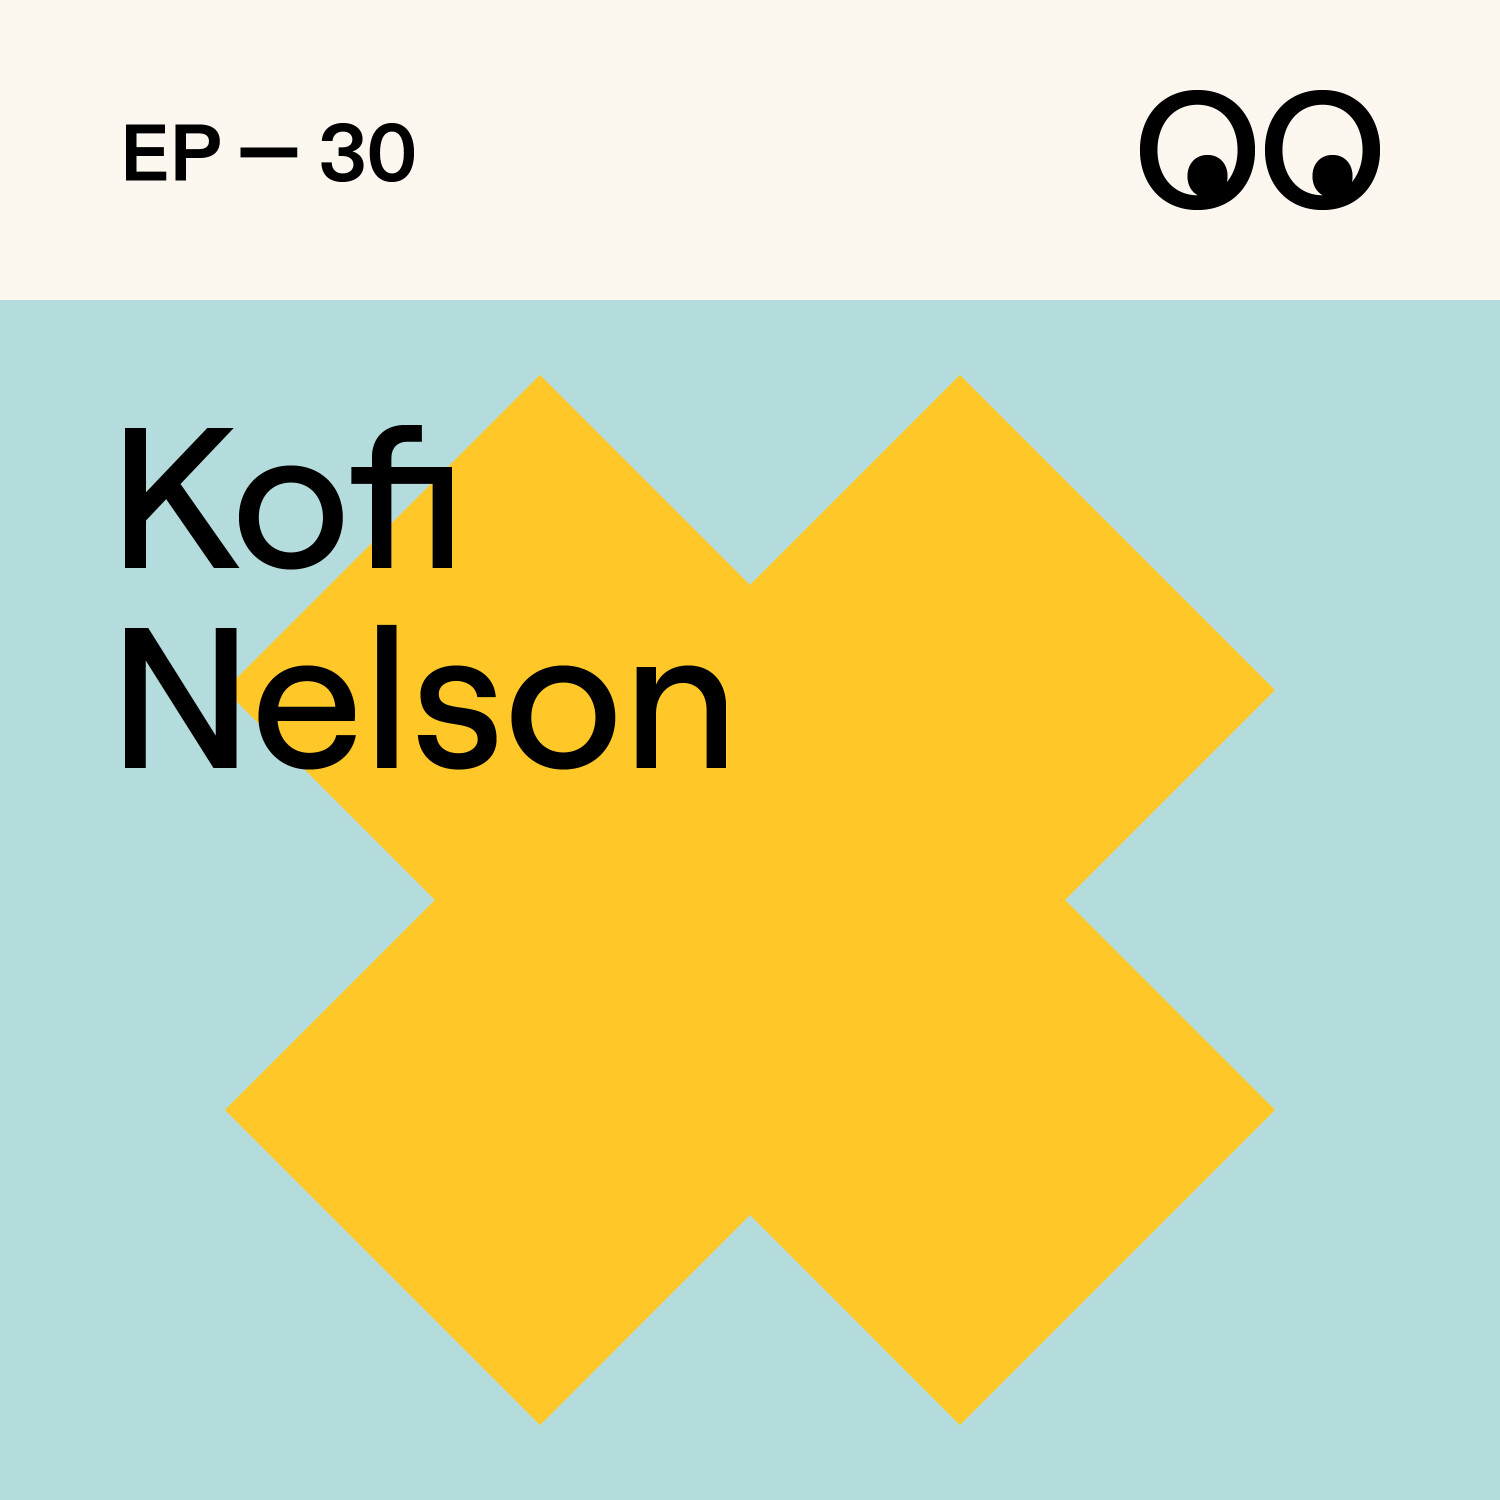 Graduating as a creative during a global pandemic, with Kofi Nelson